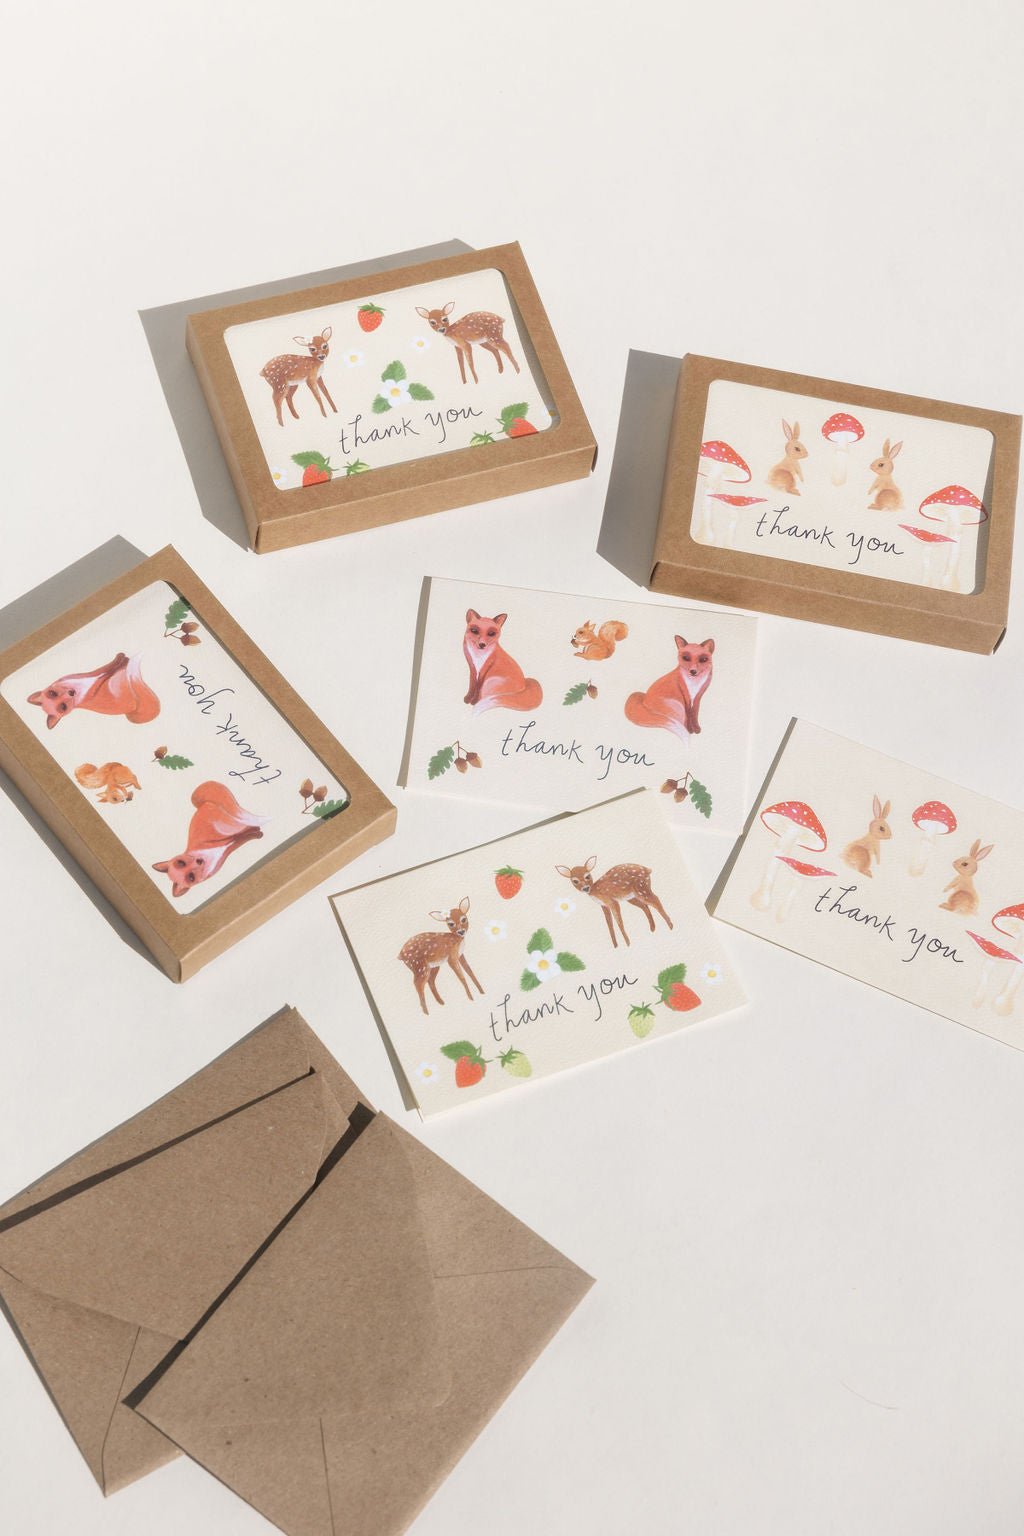 Our new forest creatures designs. Shown in kraft boxes.